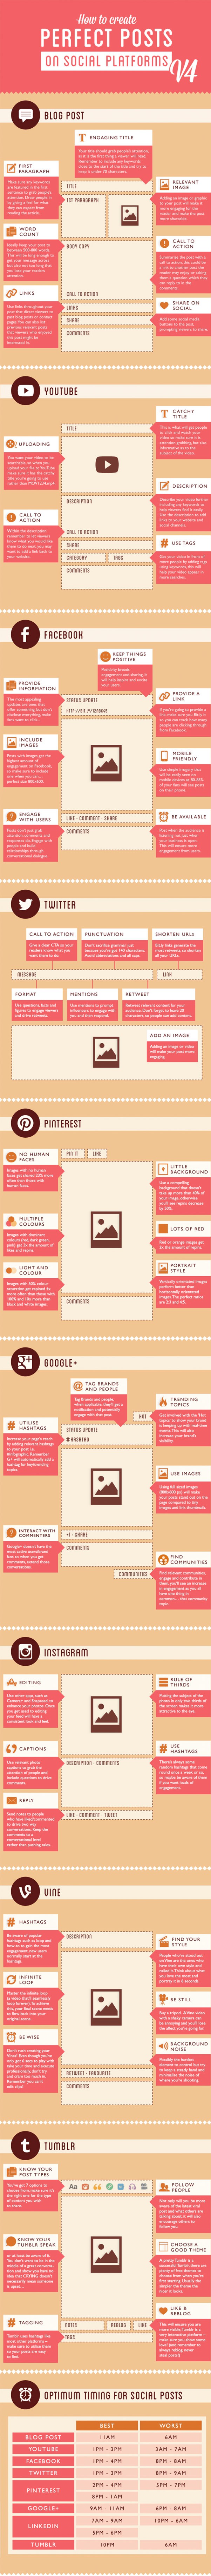 how-craft-perfect-social-post-infographic